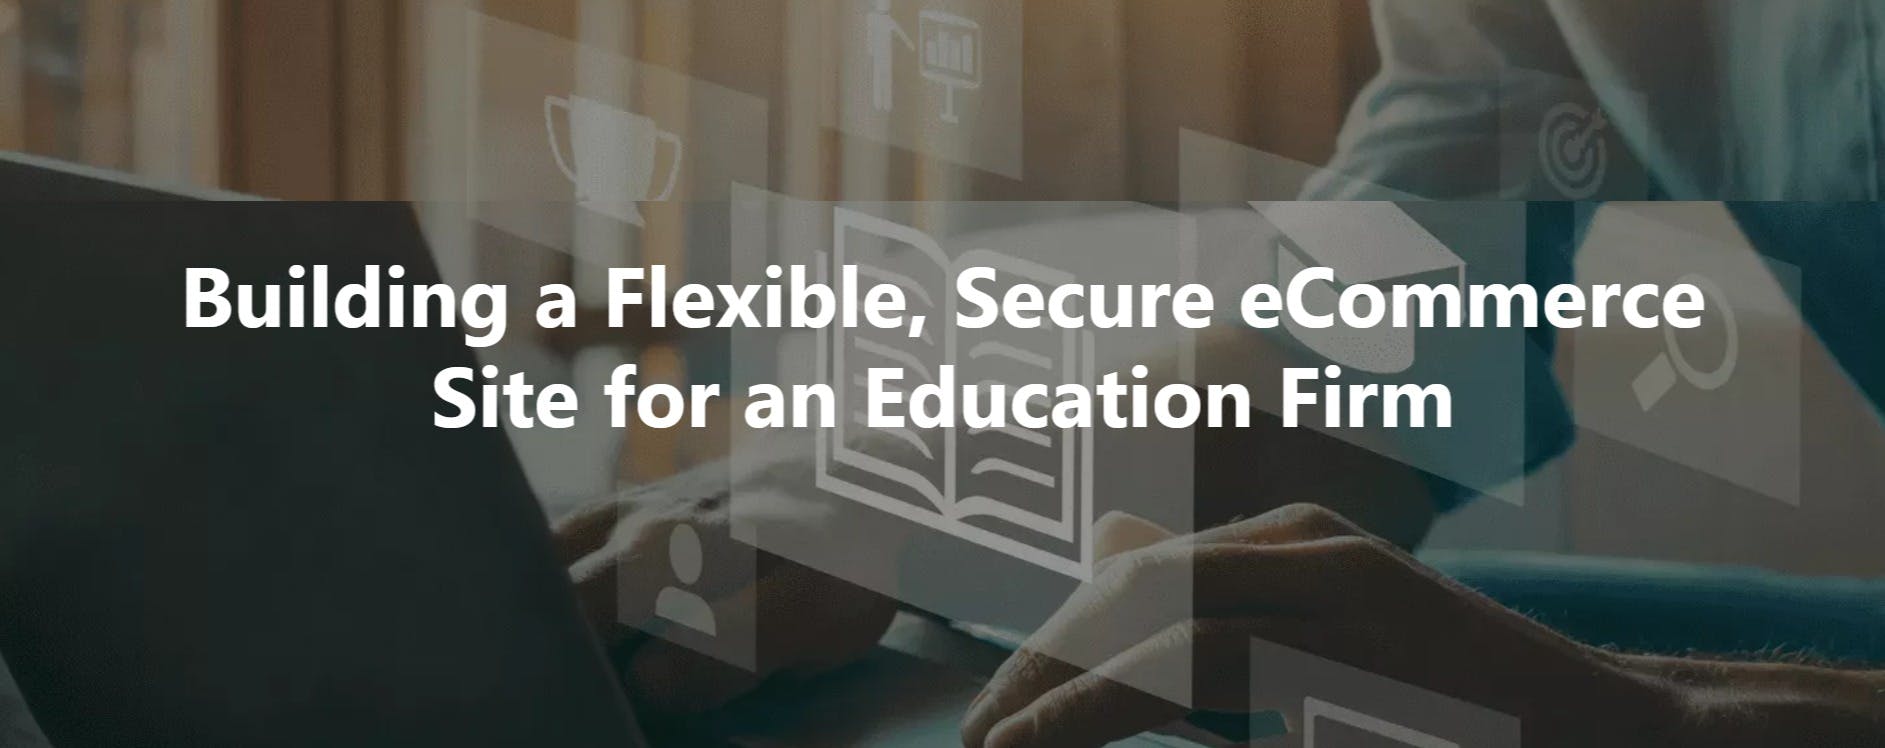 Building A Flexible Secure eCommerce Site For An Education Firm